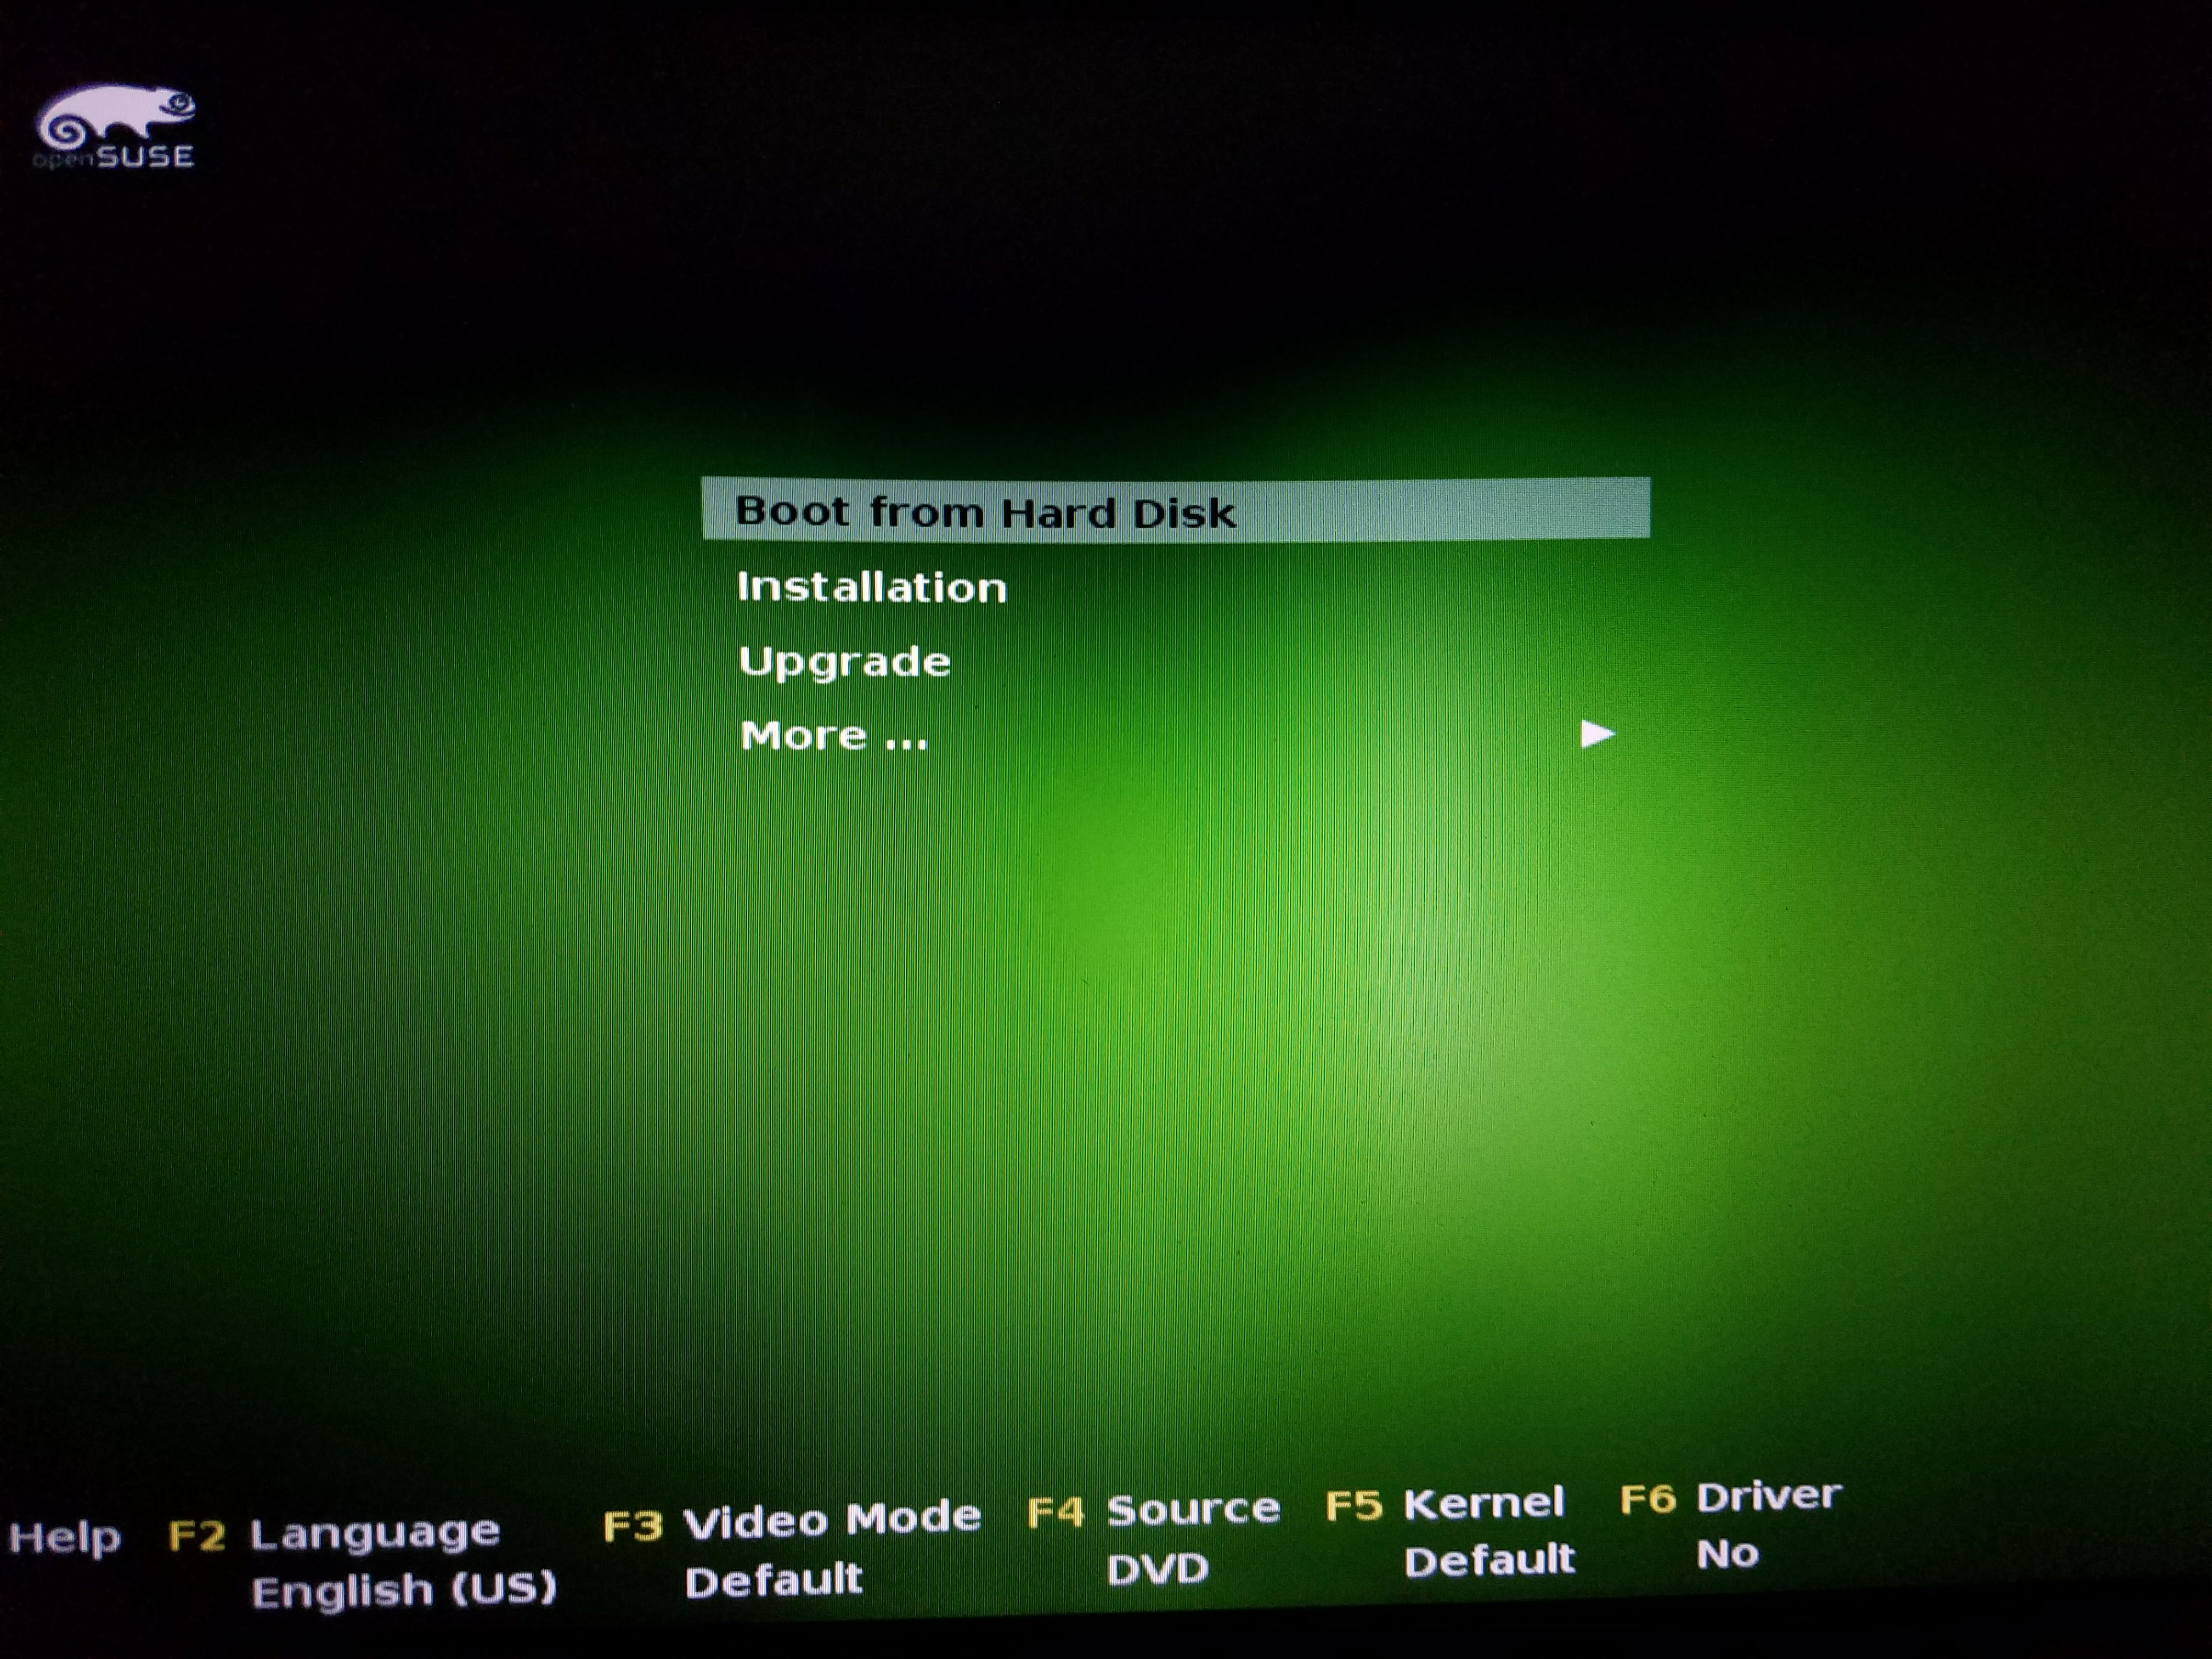 opensuse-booting